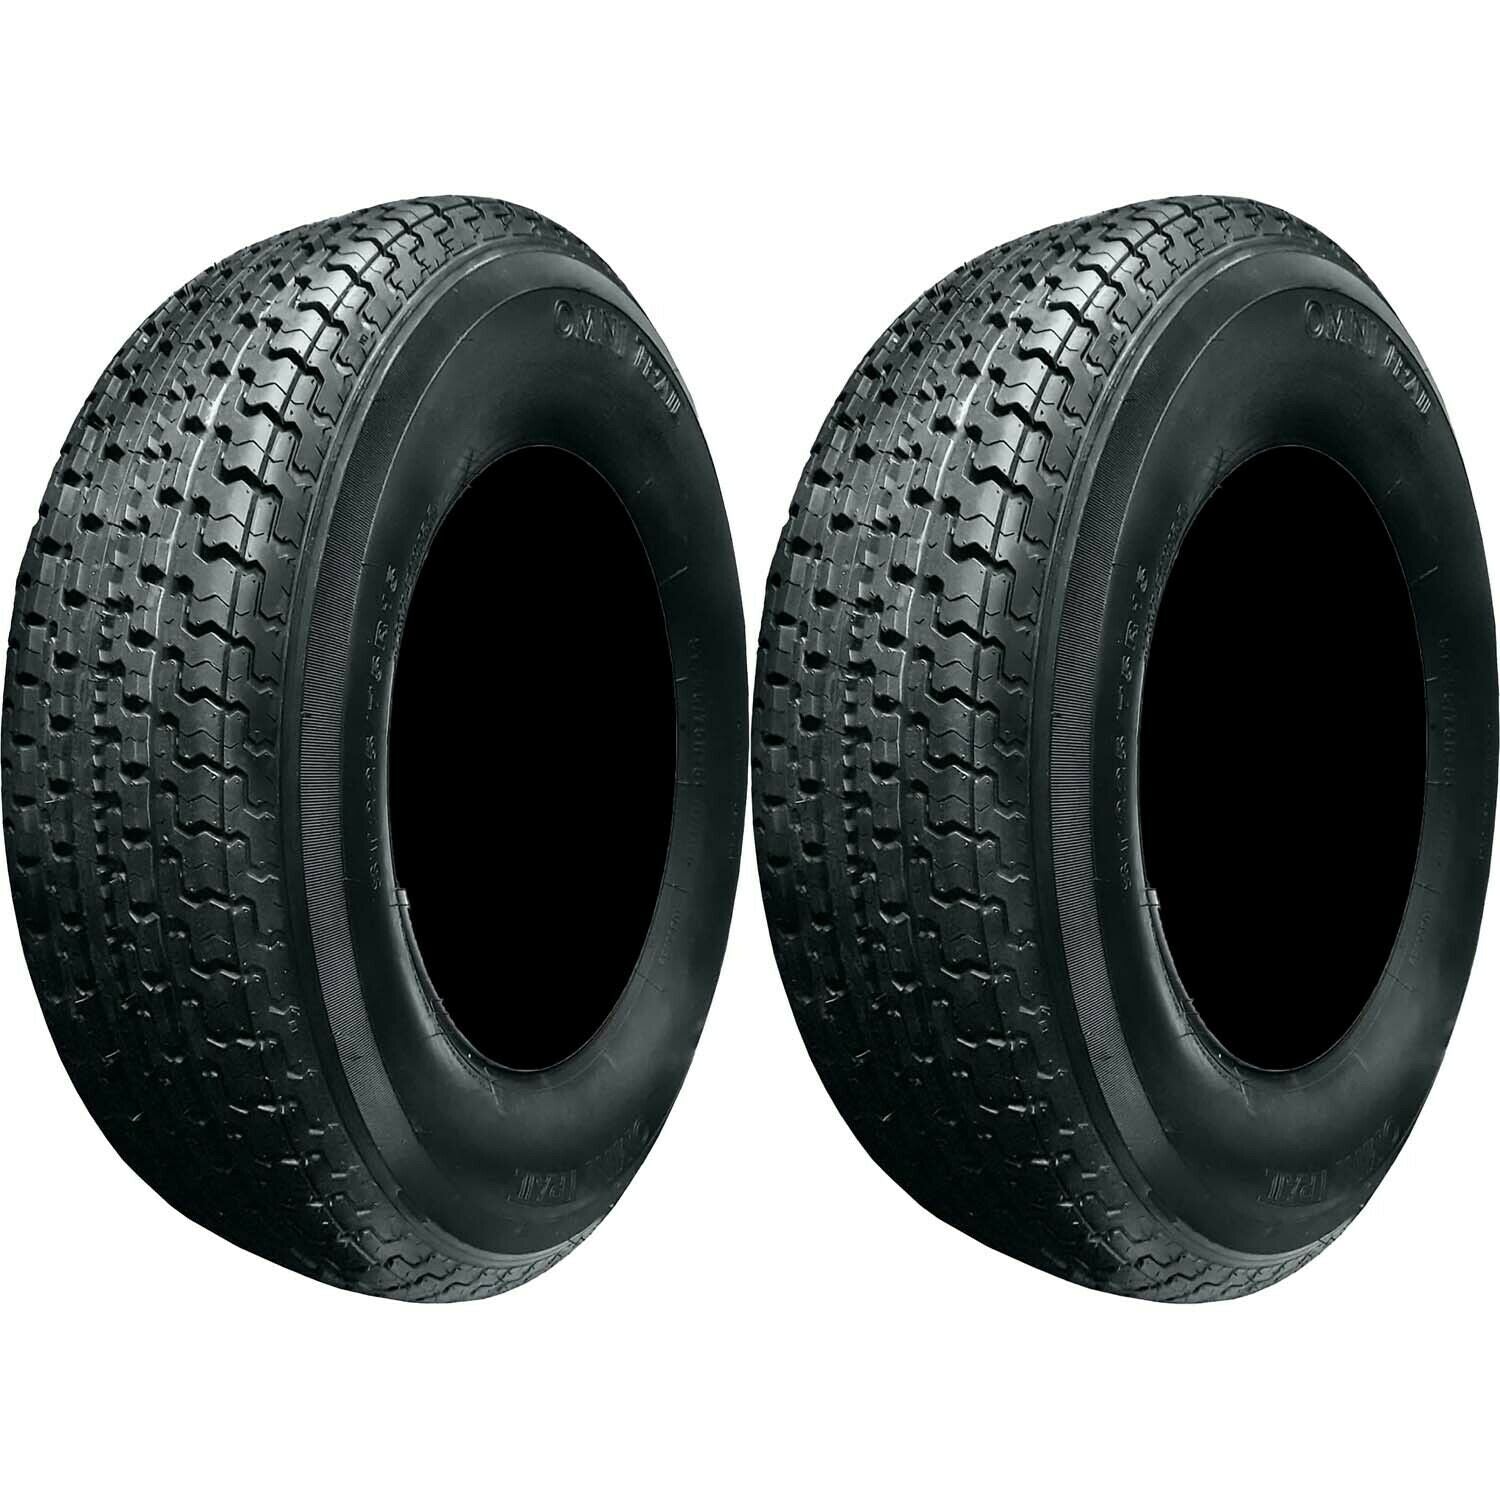 Omni Trail Radial Trailer Tire LRE 10ply ST235/80R16 Pack of 2